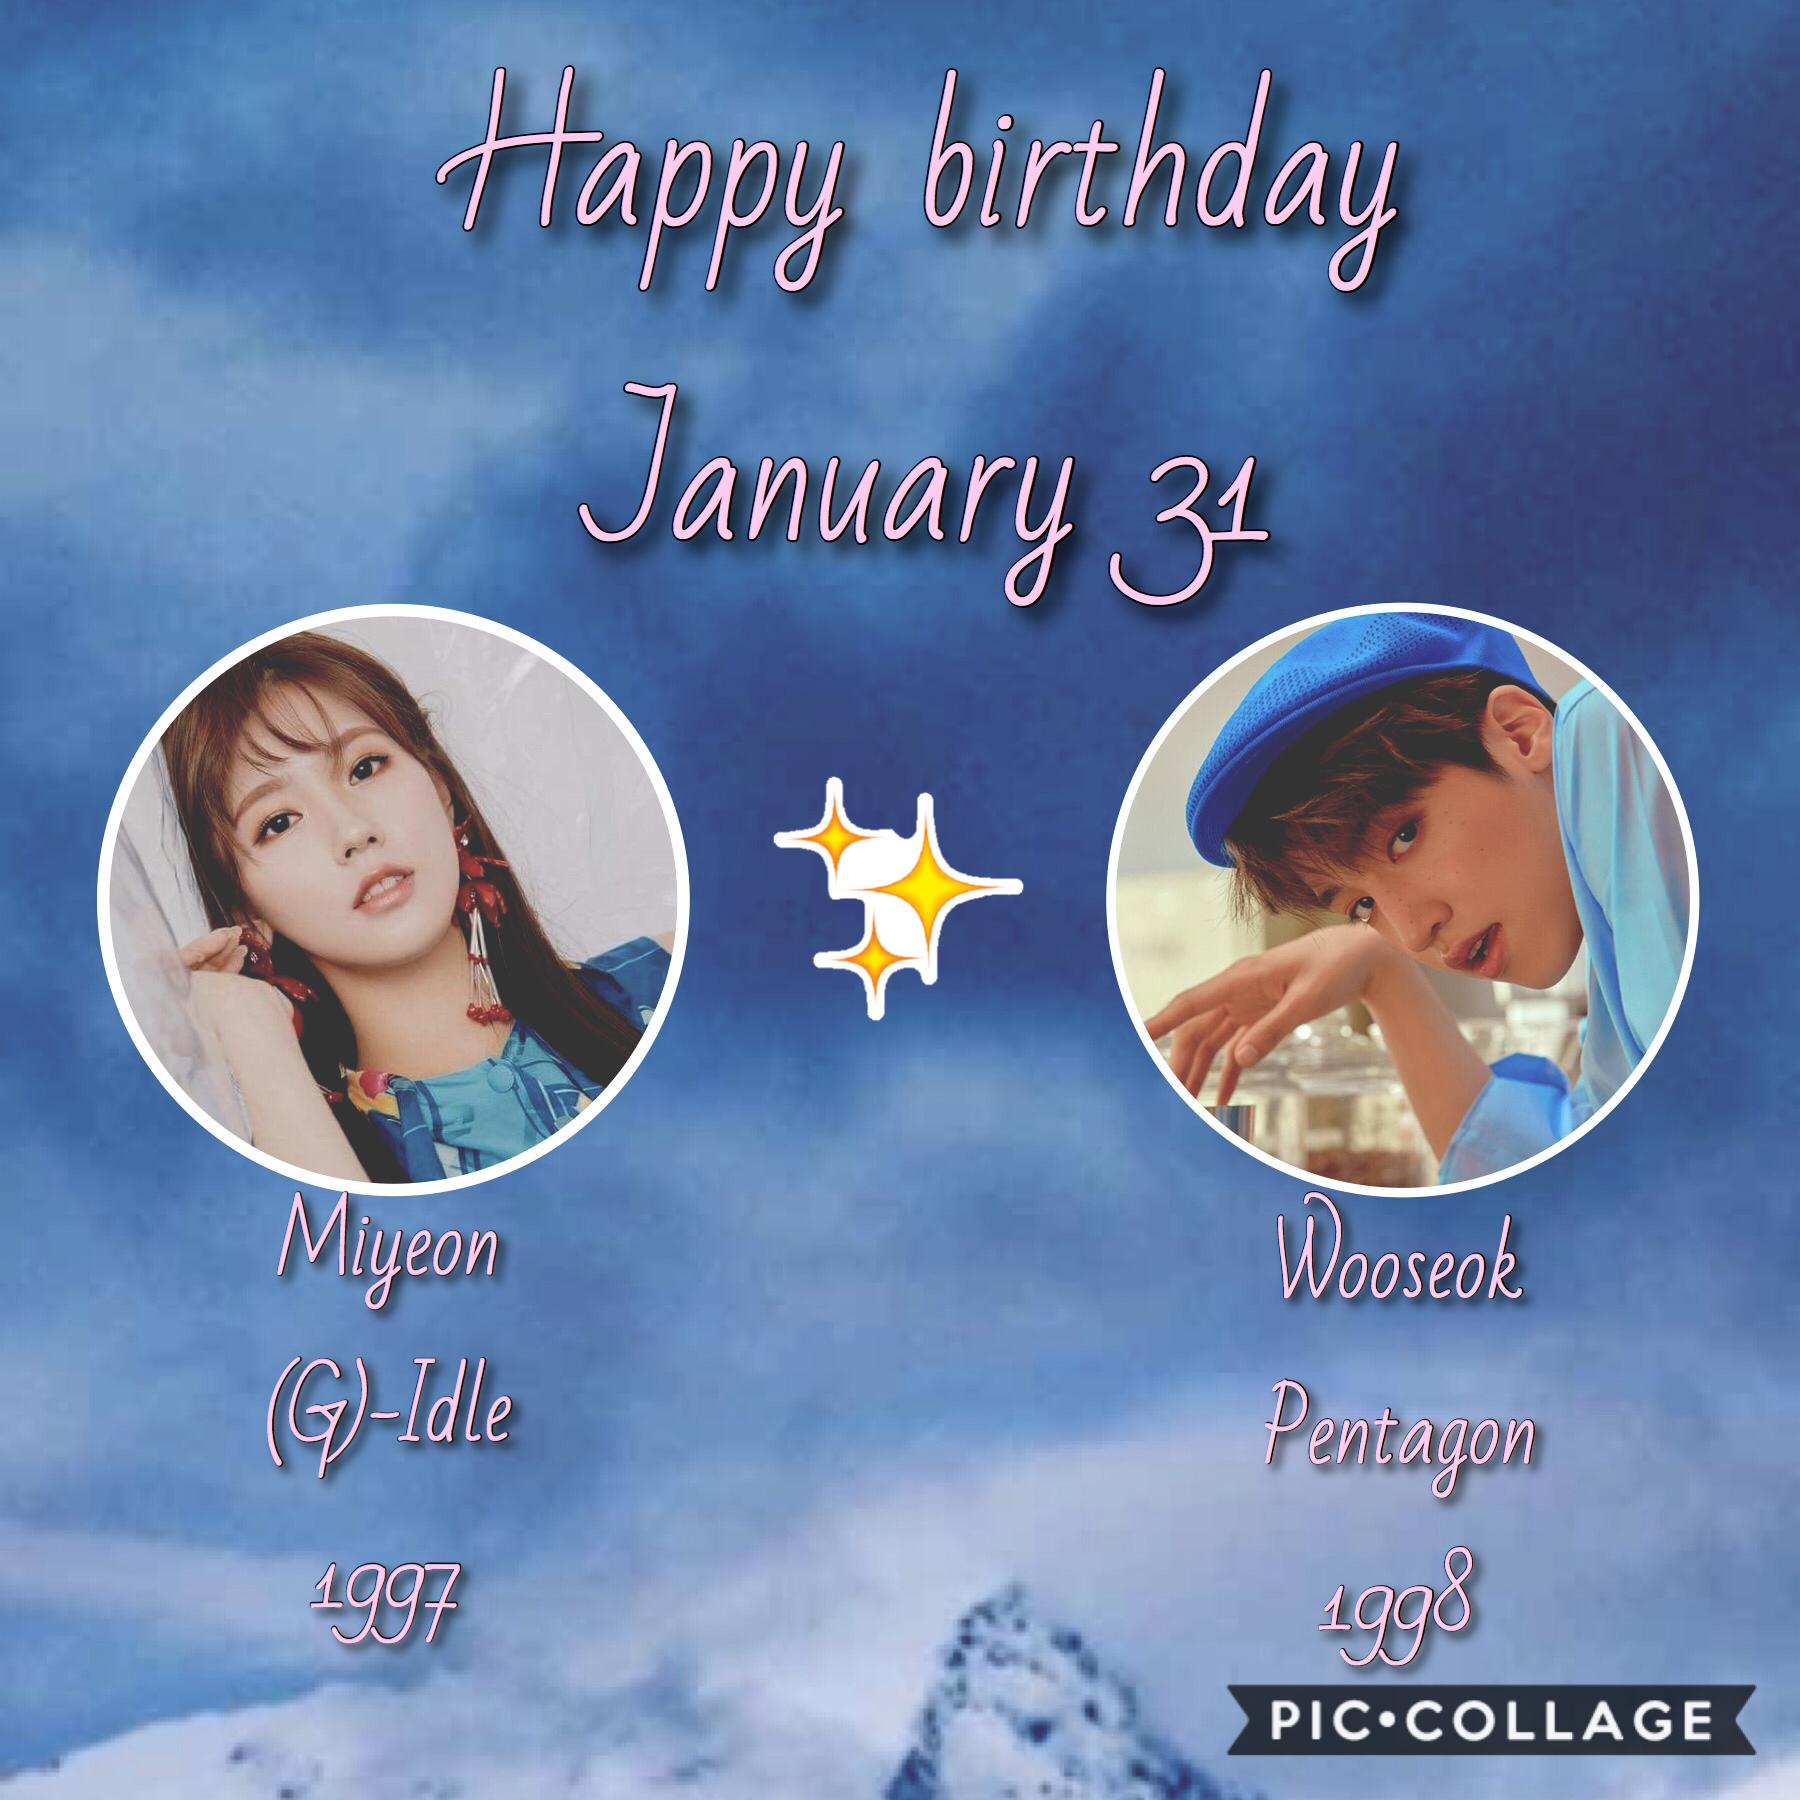 •🎈❄️•
Happy birthday to these two talented artists from CUBE ent:)
Can’t believe it’s already the end of January 2020!
☃️❄️~Whoop~❄️☃️